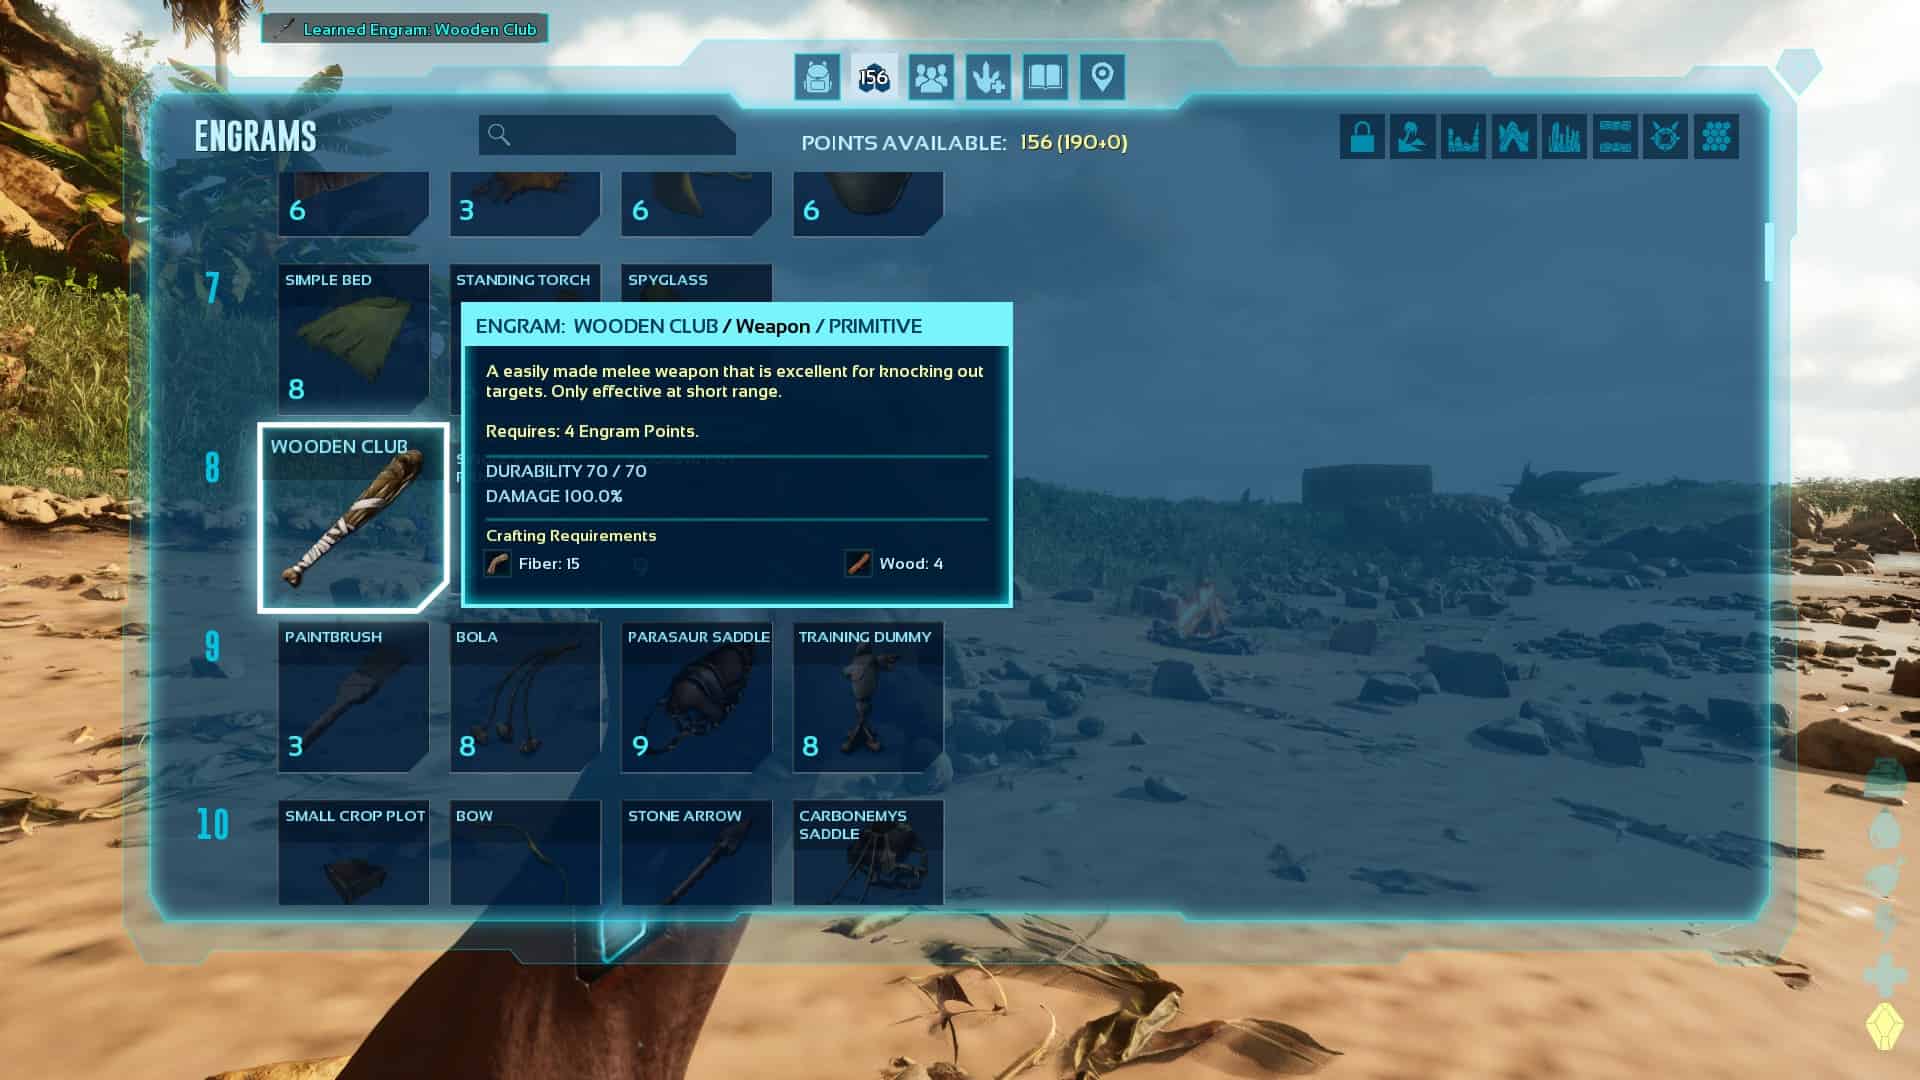 ARK Survival Ascended how to tame: The Wooden Club in the Engram menu.